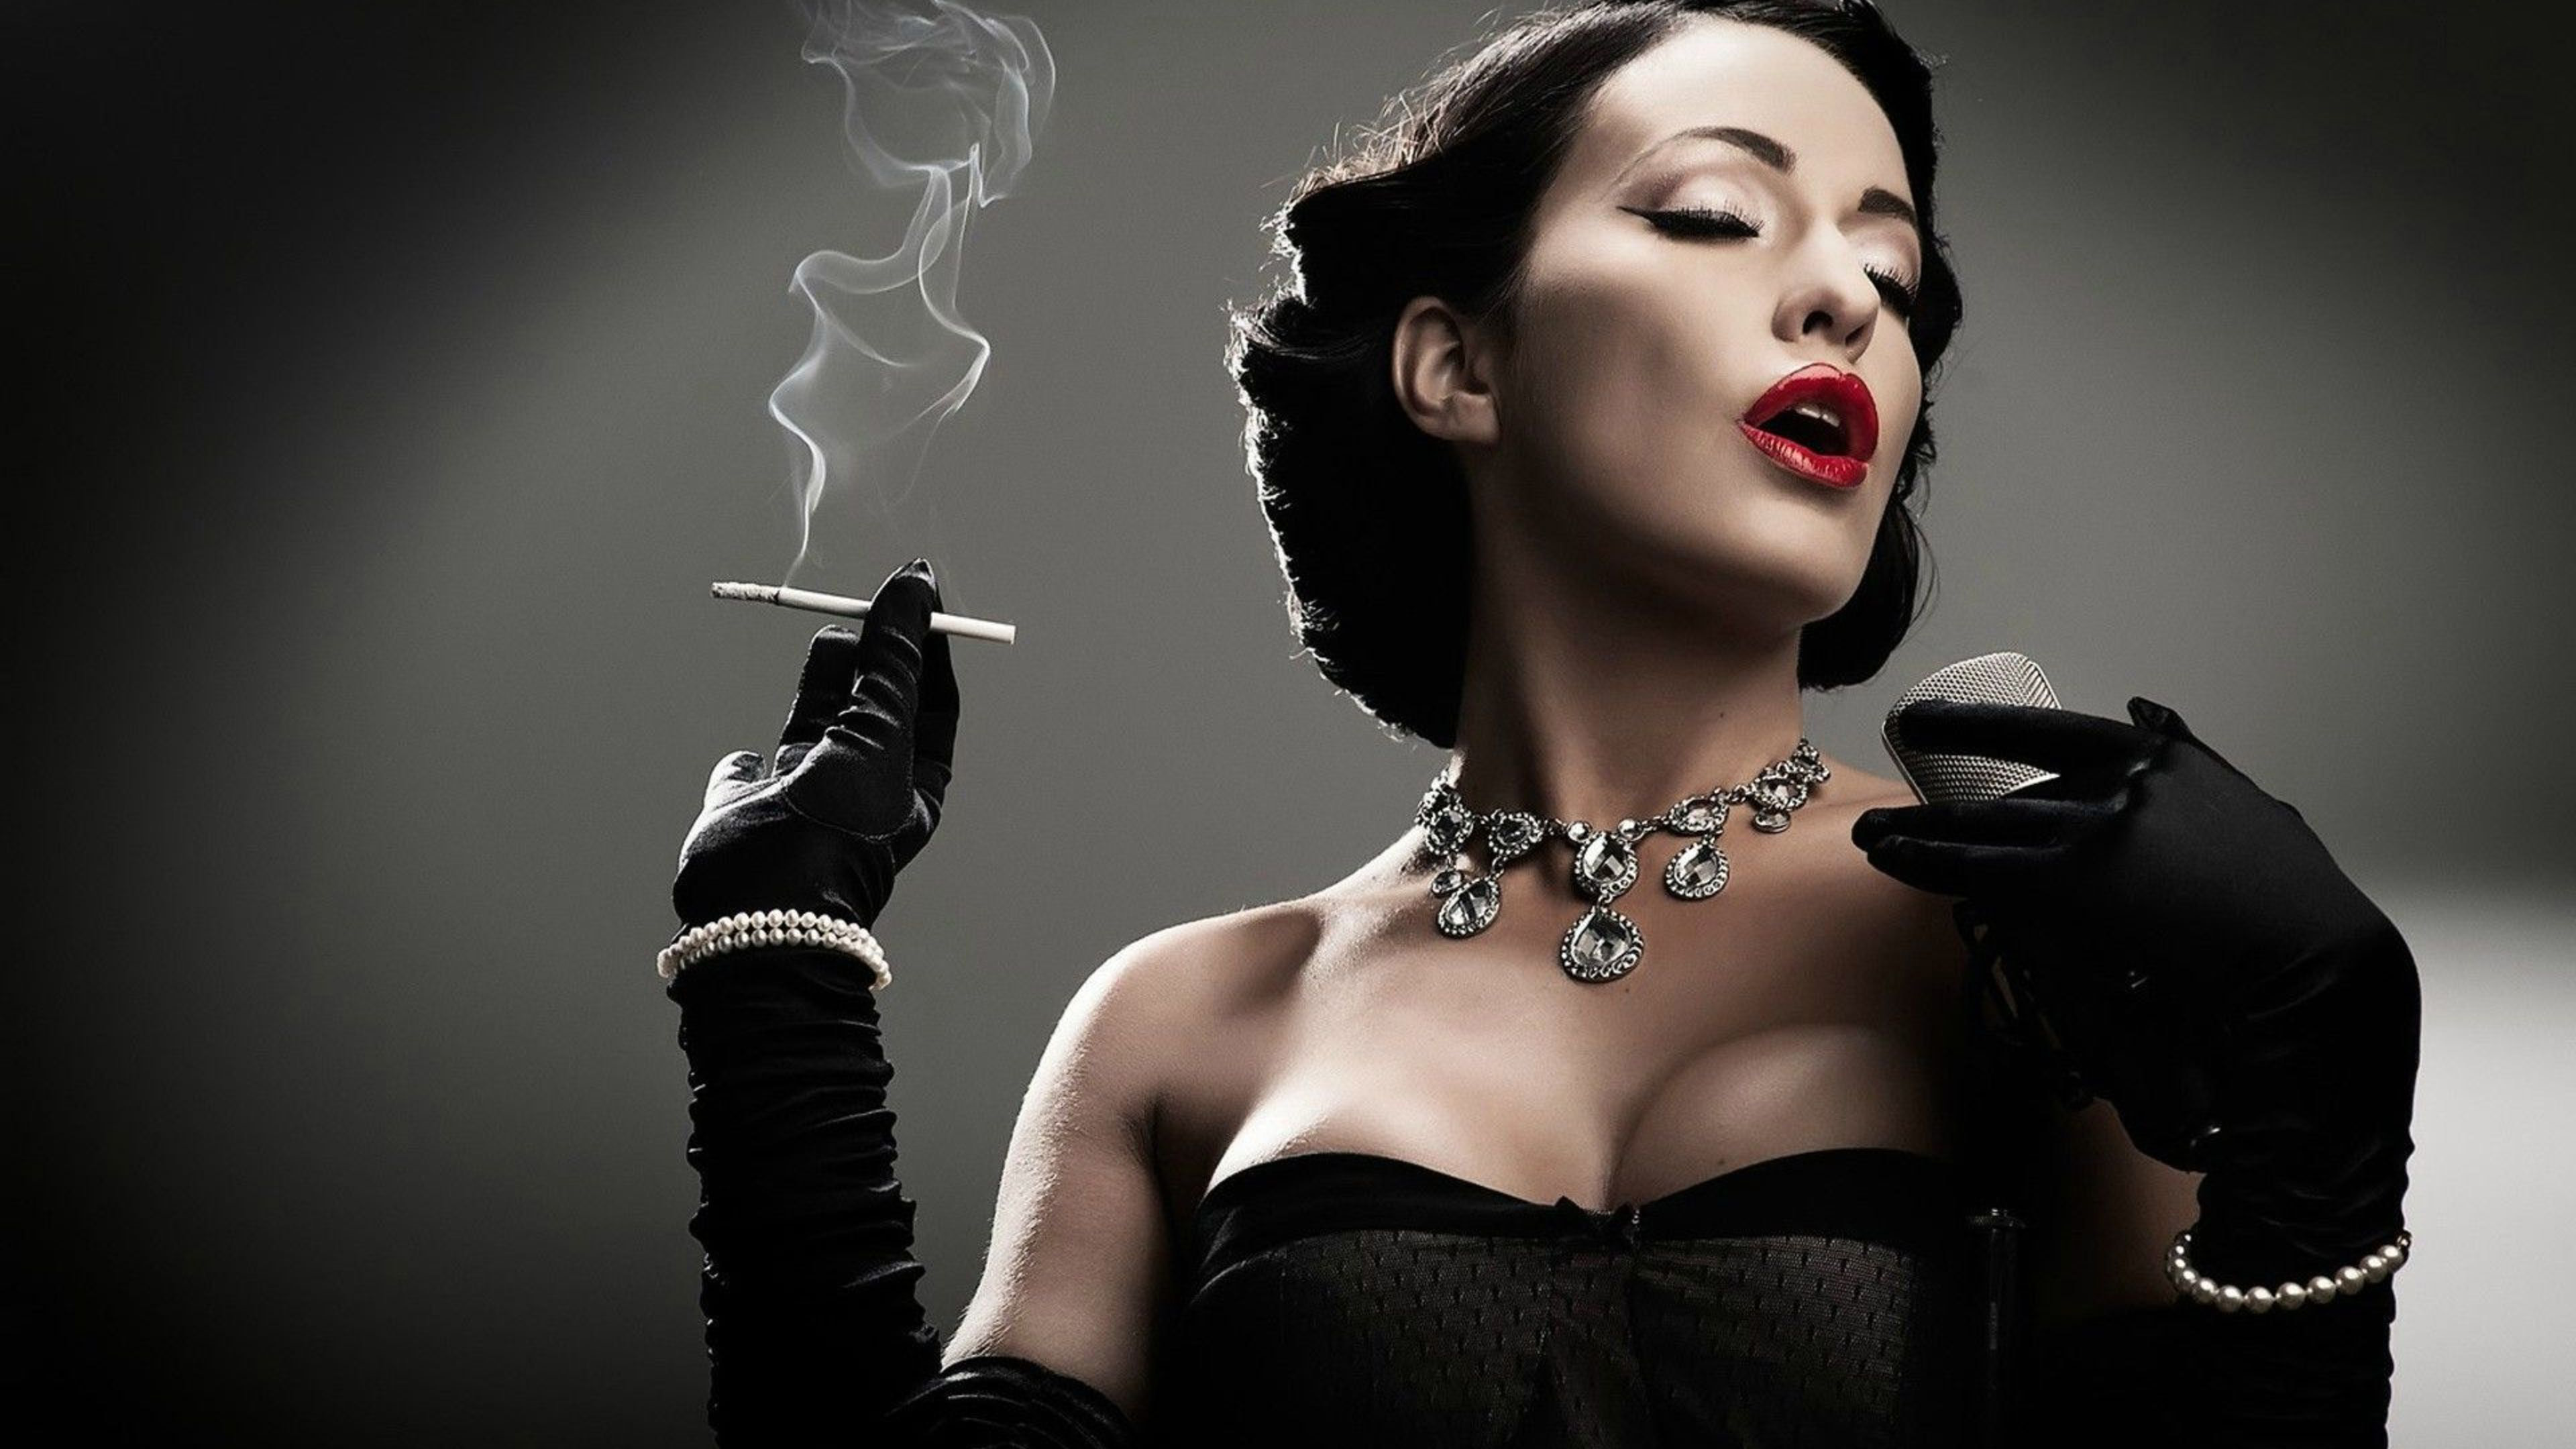 Dita Von Teese Wallpaper High Resolution And Quality